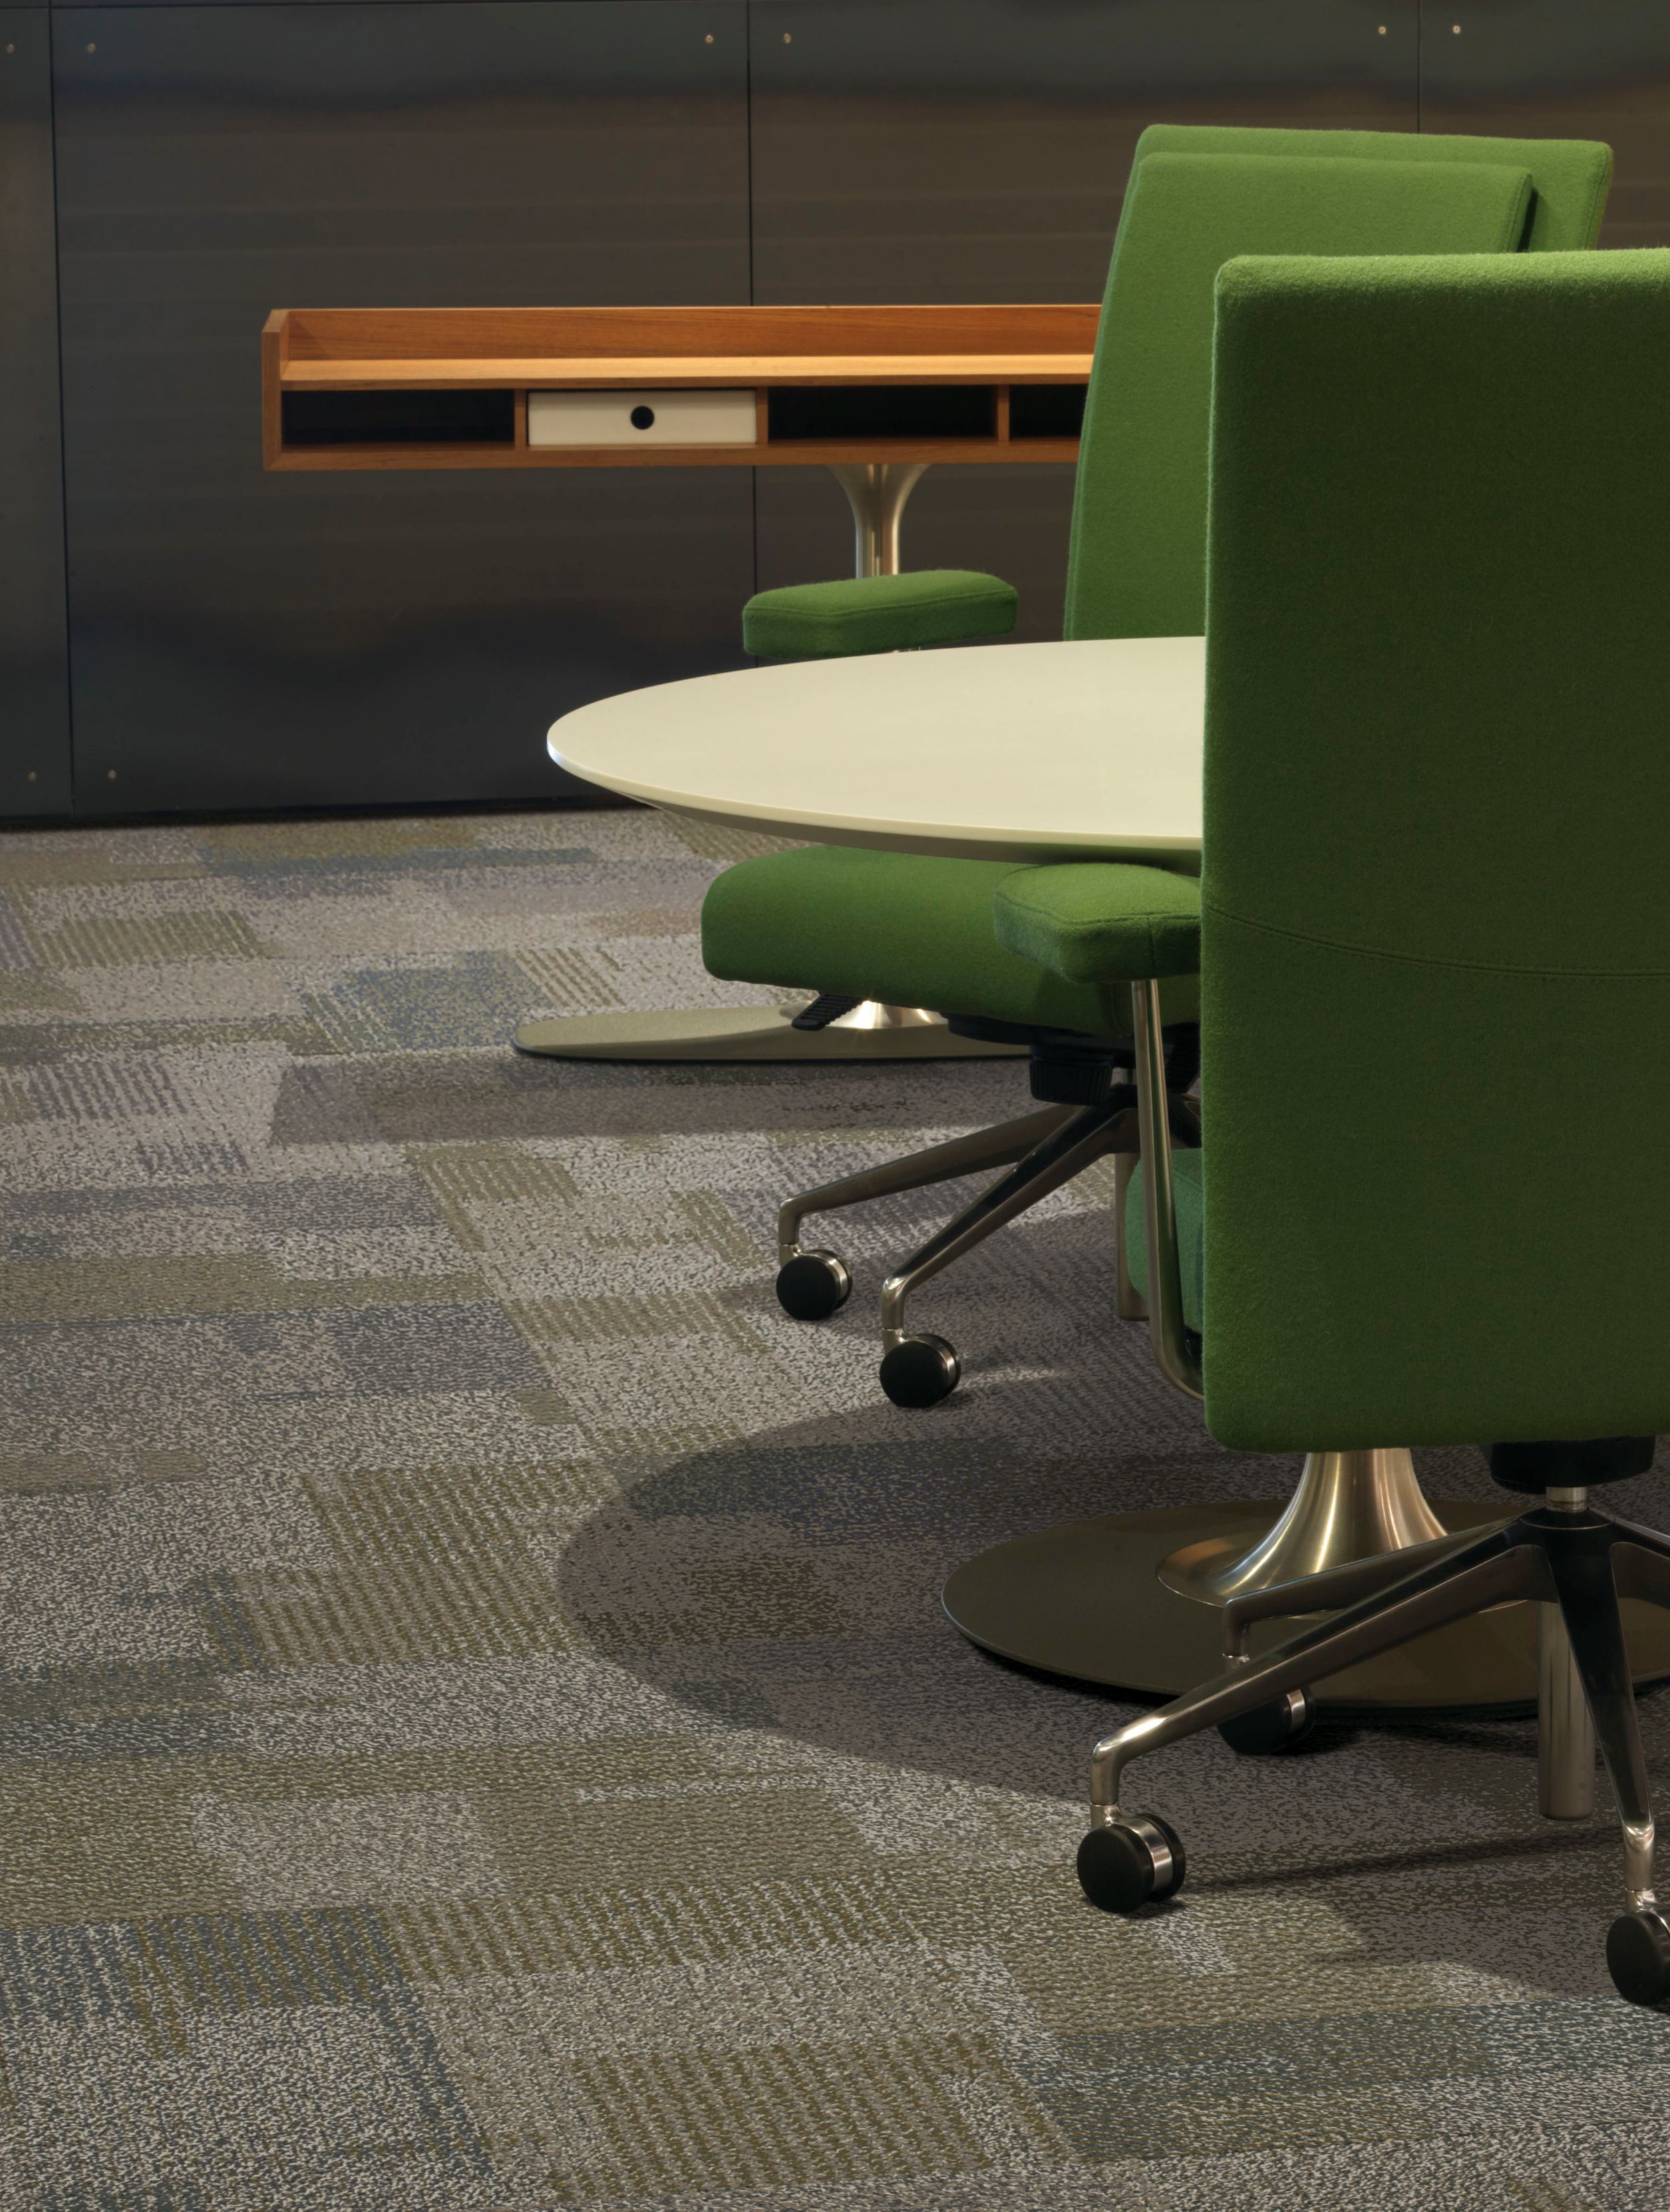 Interface Entropy carpet tile in room with green chairs and wooden shelf in background image number 7